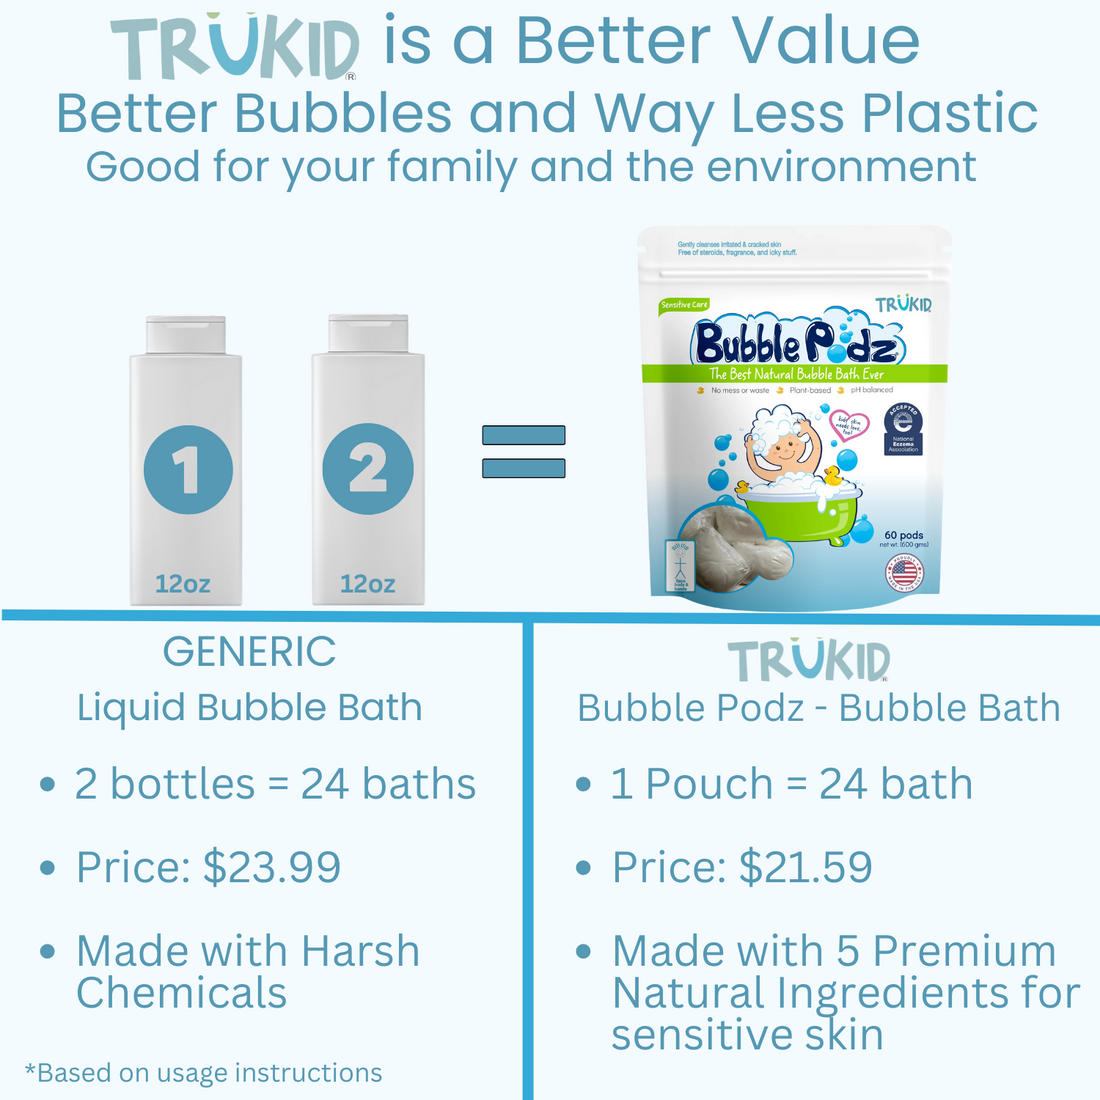 TruKid is a better value, better bubbles and way less plastic. Good for your family and the environment.